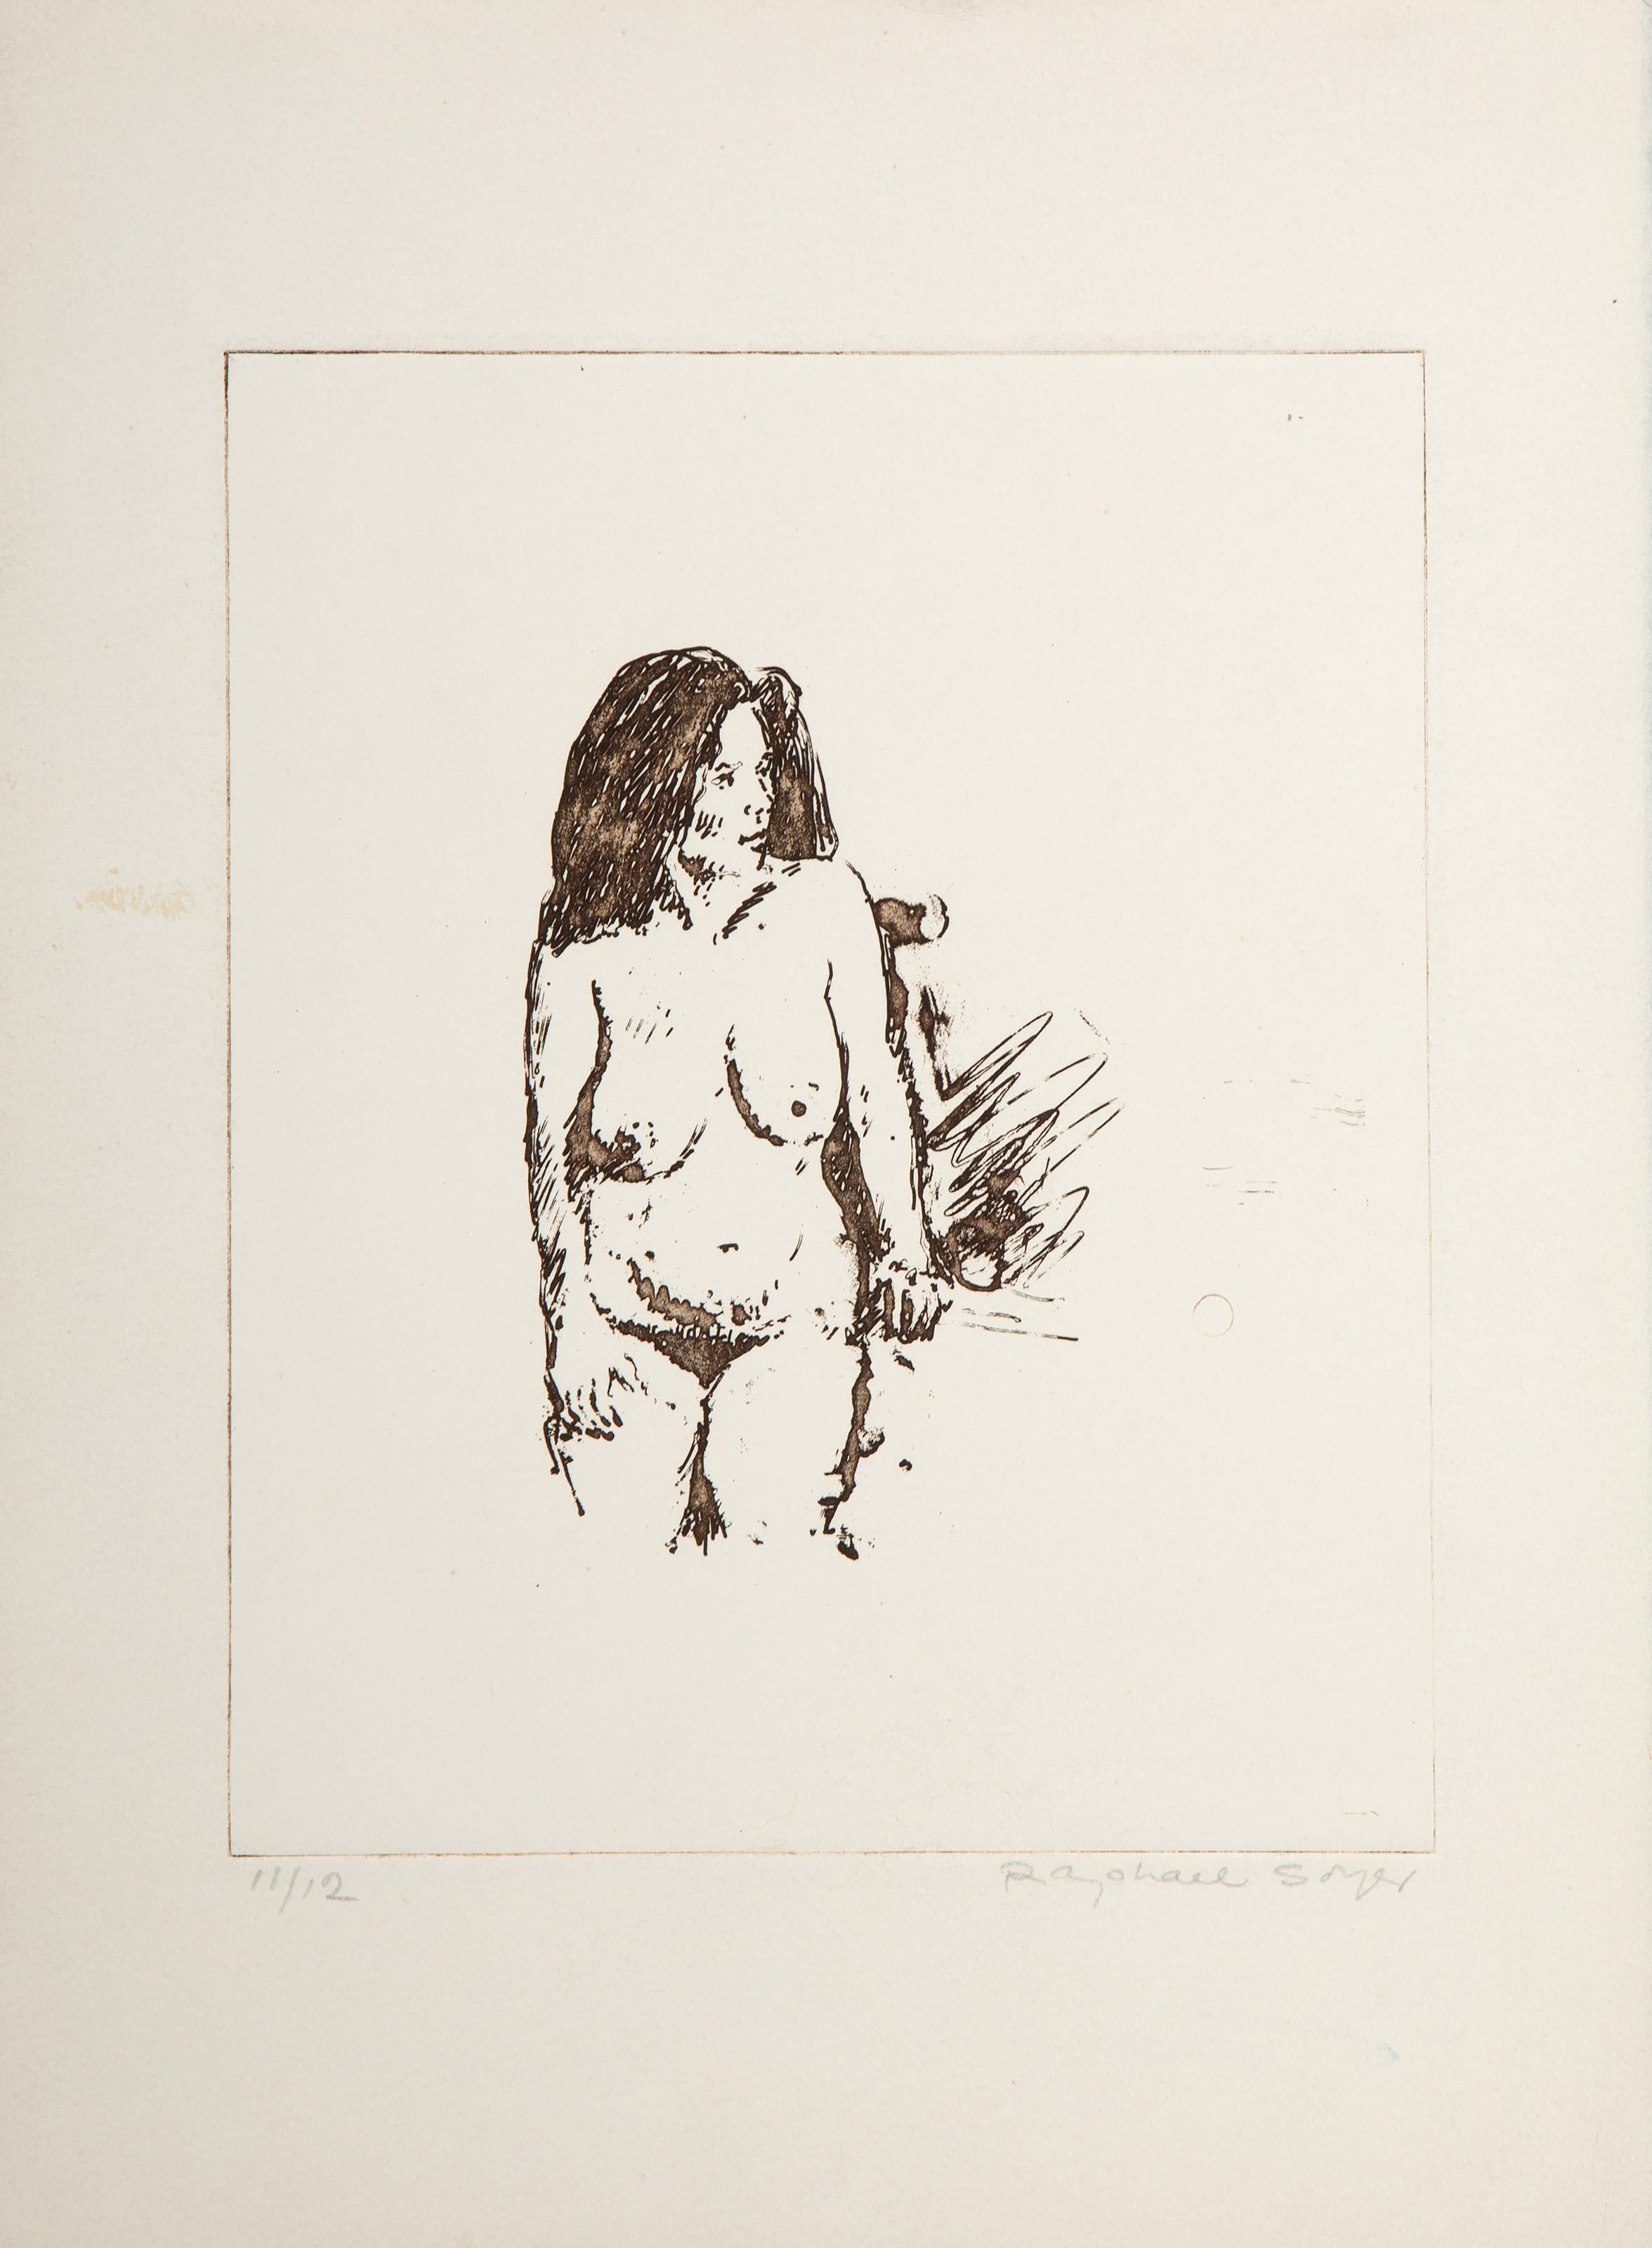 Raphael Soyer, Russian/American (1899 - 1987) -  Nude Study III. Medium: Etching, signed and numbered in pencil, Edition: 11/12, Image Size: 10 x 8 inches, Size: 15 x 11 in. (38.1 x 27.94 cm) 